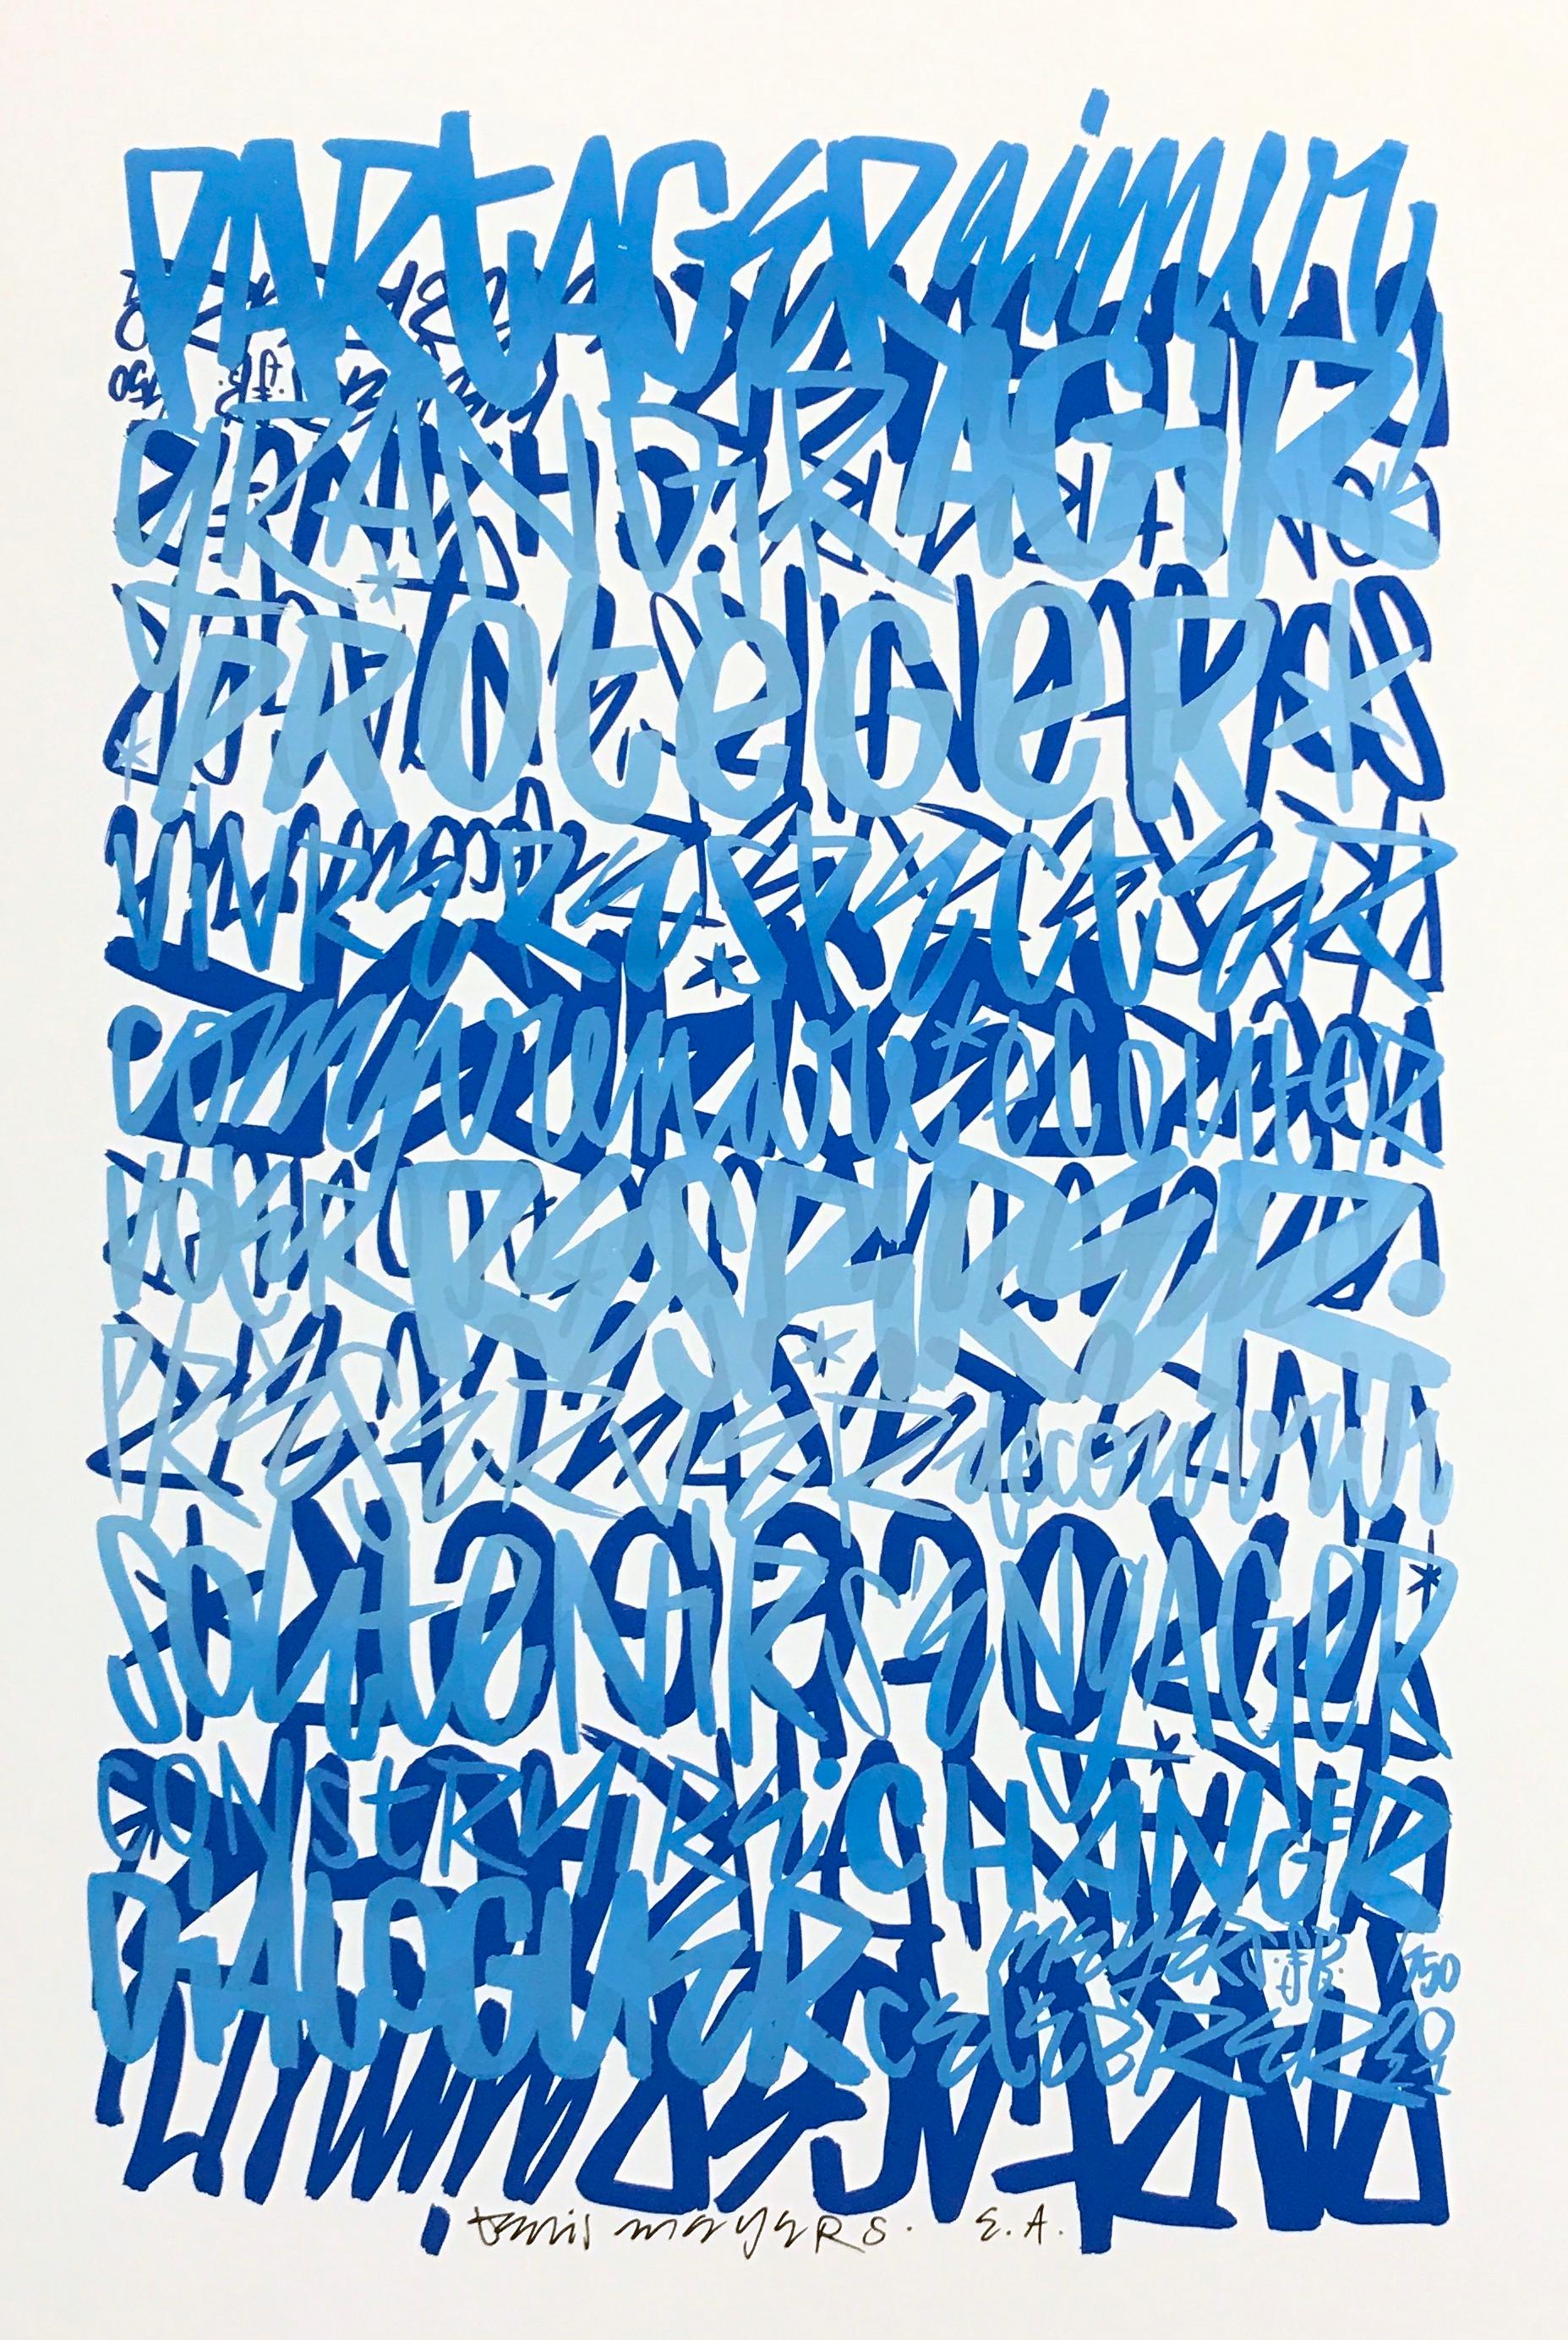 A print from an original drawing by Denis Meyers - Artist proof from an edition. The print on paper features some of Denis Meyers "Word Patterns", printed one over another in blue inks. Ships flat and inquire for framing option

Born in 1979, Denis